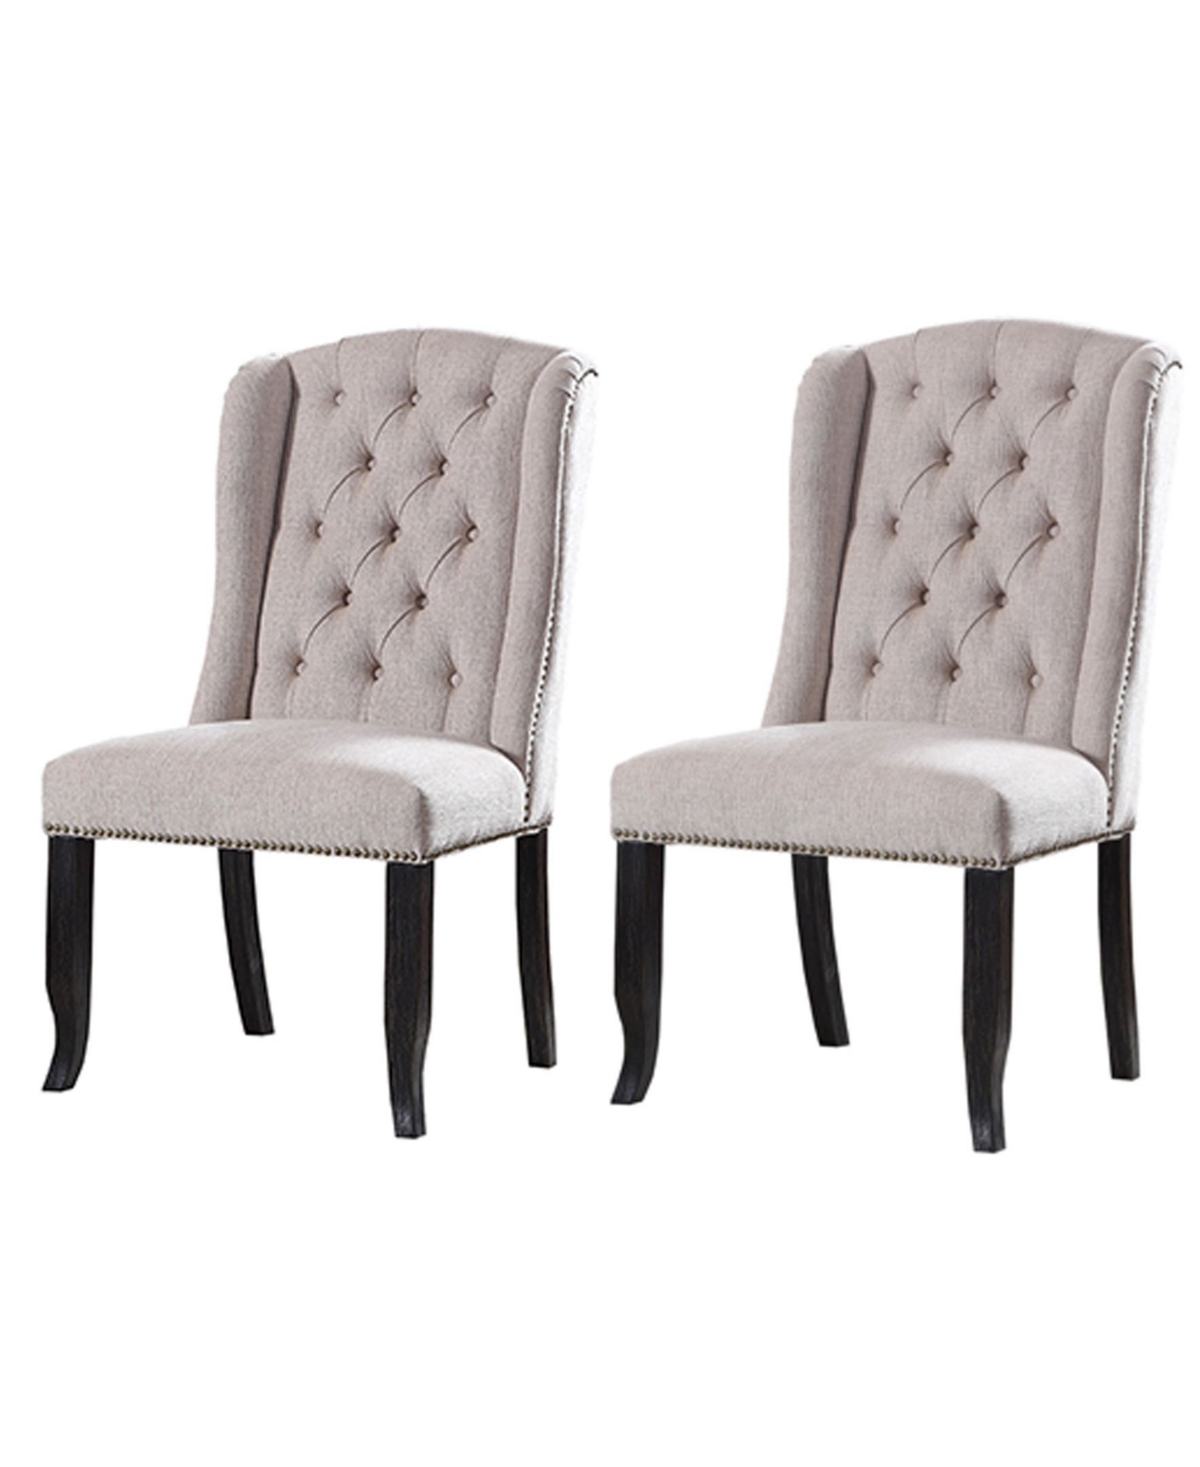 Huntington Upholstered Side Chairs with Tufted Back, Set of 2